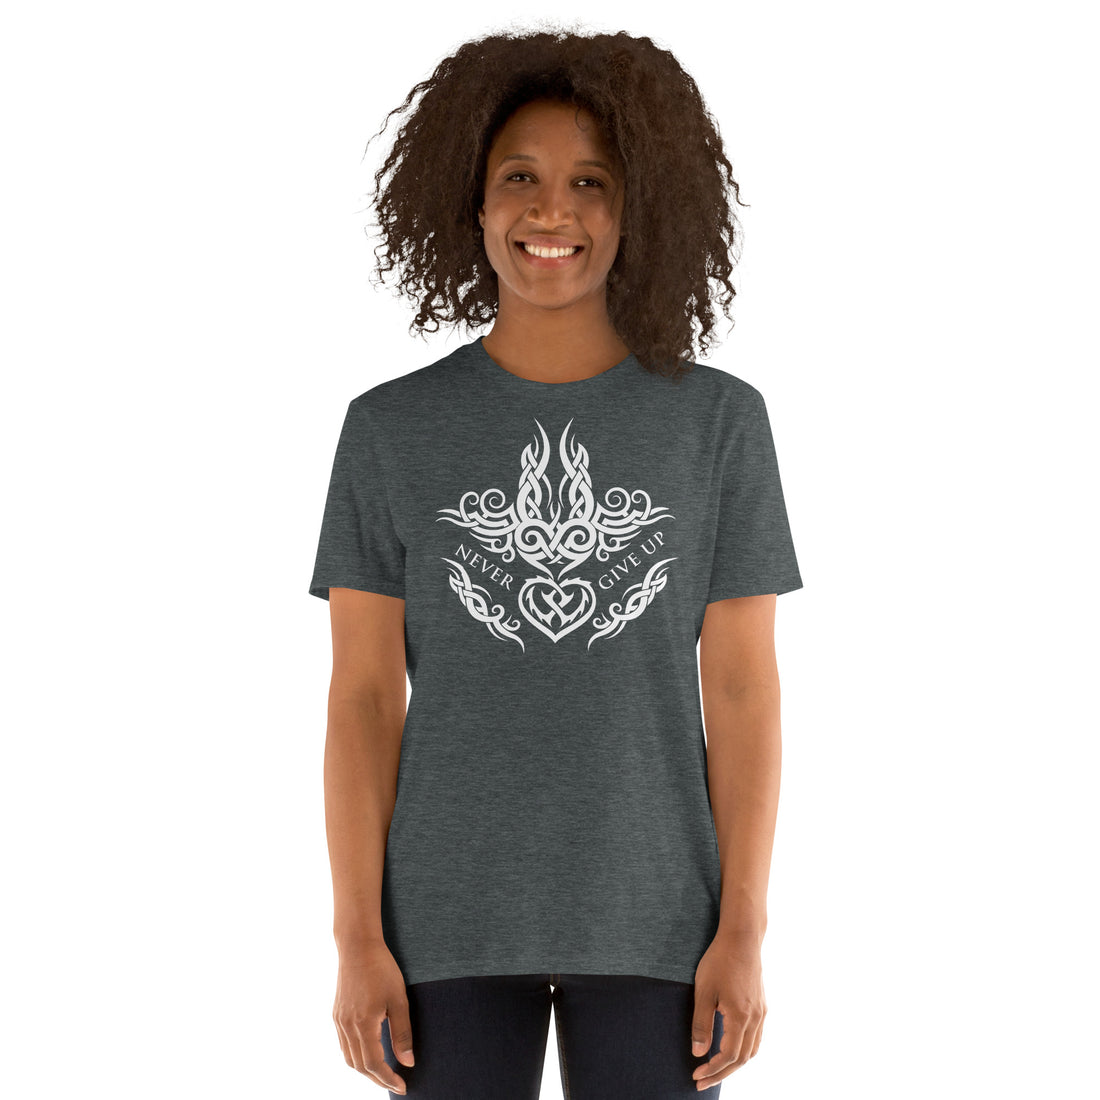 Never Give Up T-Shirt - motivational message Tee, Celtic ornament - heart, thorns, fire, and waves